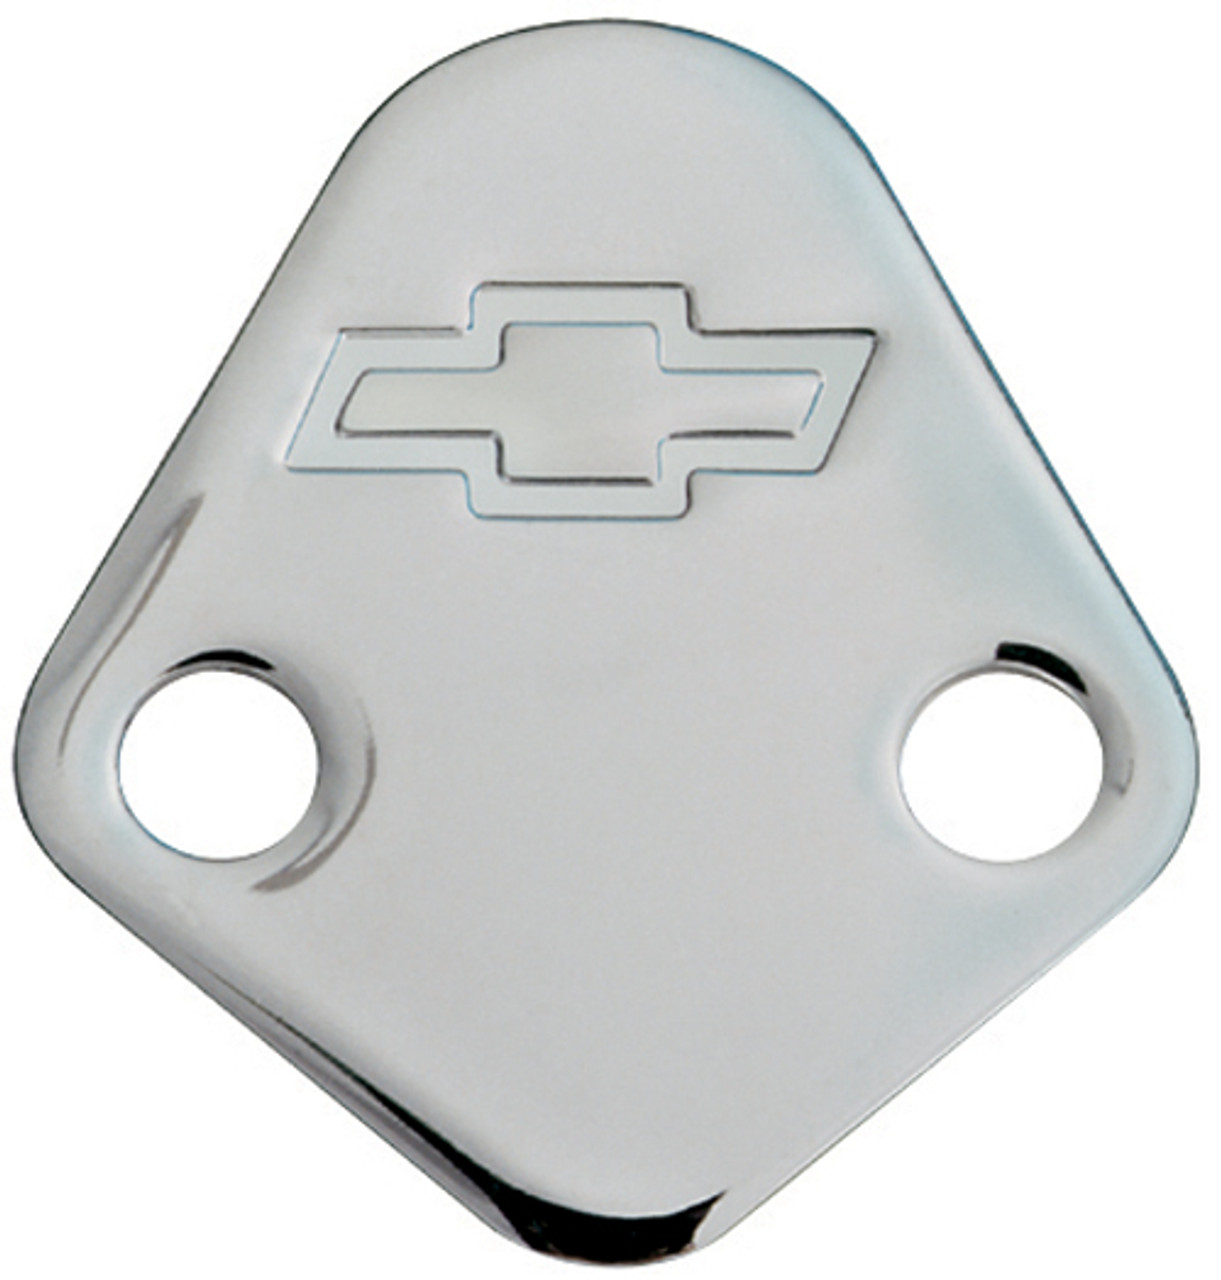 Proform 141-211 Chevy Big Block Fuel Pump Block Off Plate - Chrome Plated Steel